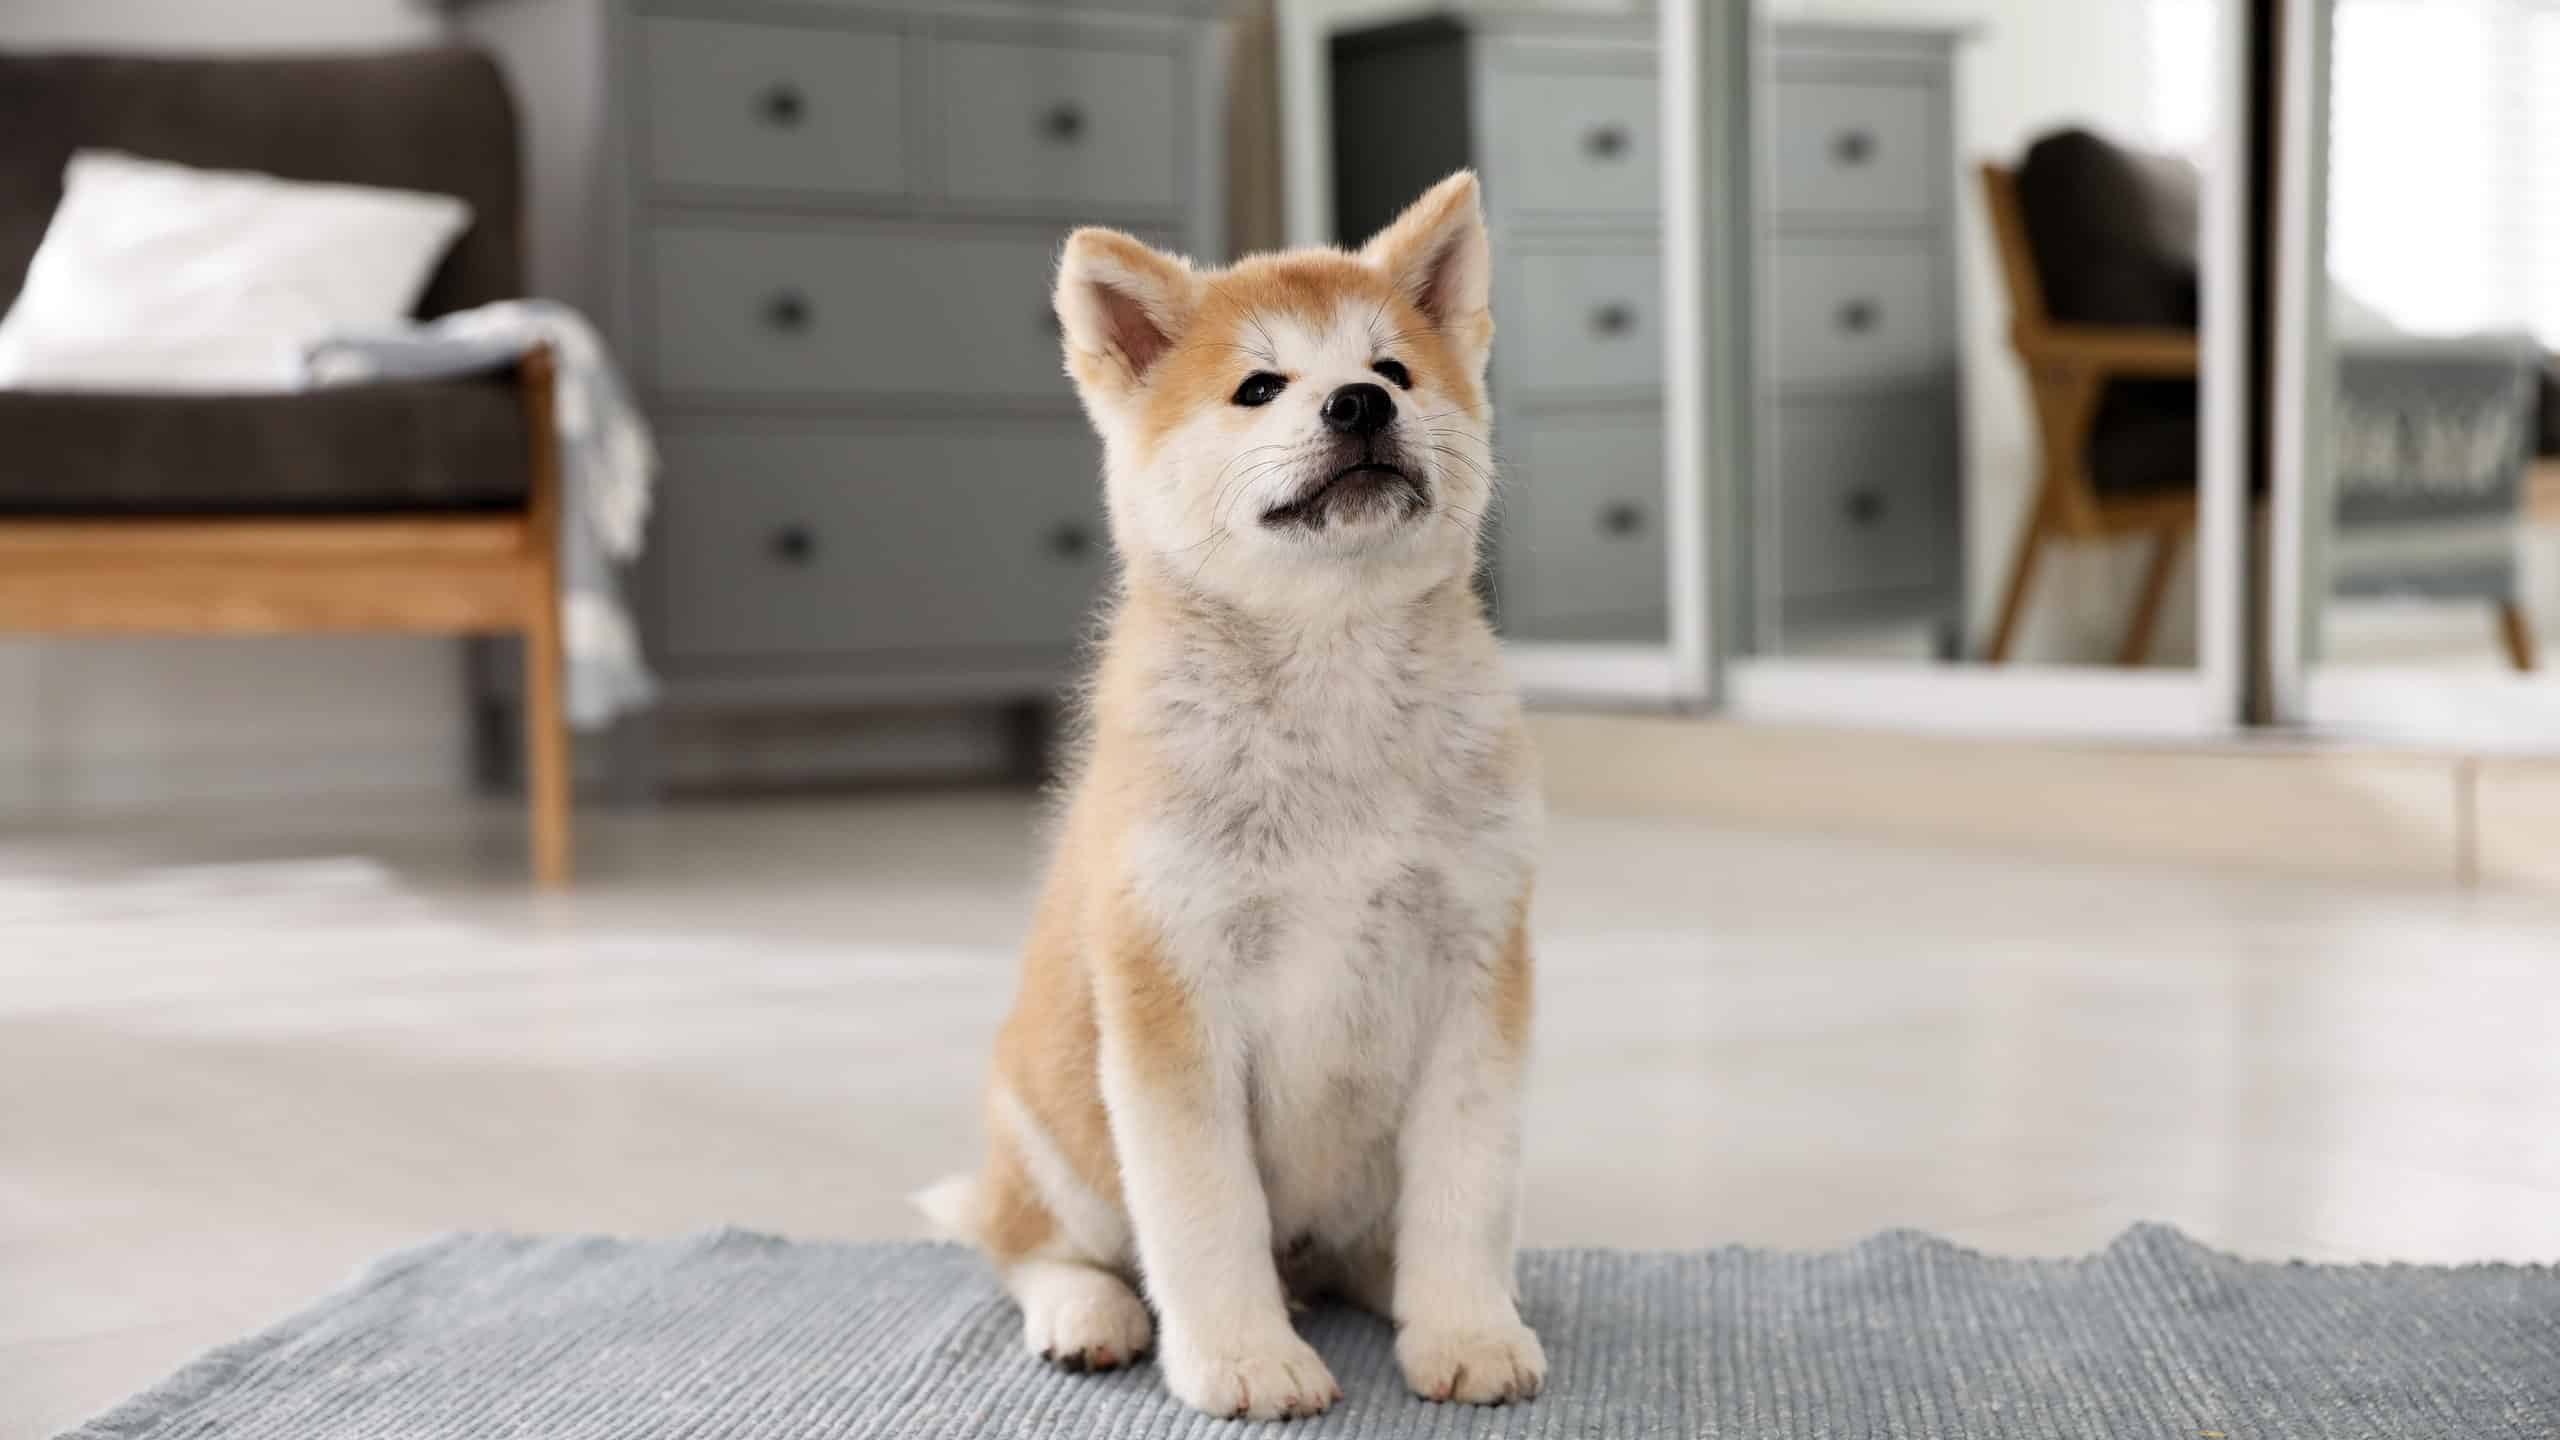 Akita Inu Puppy Next to Wet Spot - Dog Keeps Peeing in the House